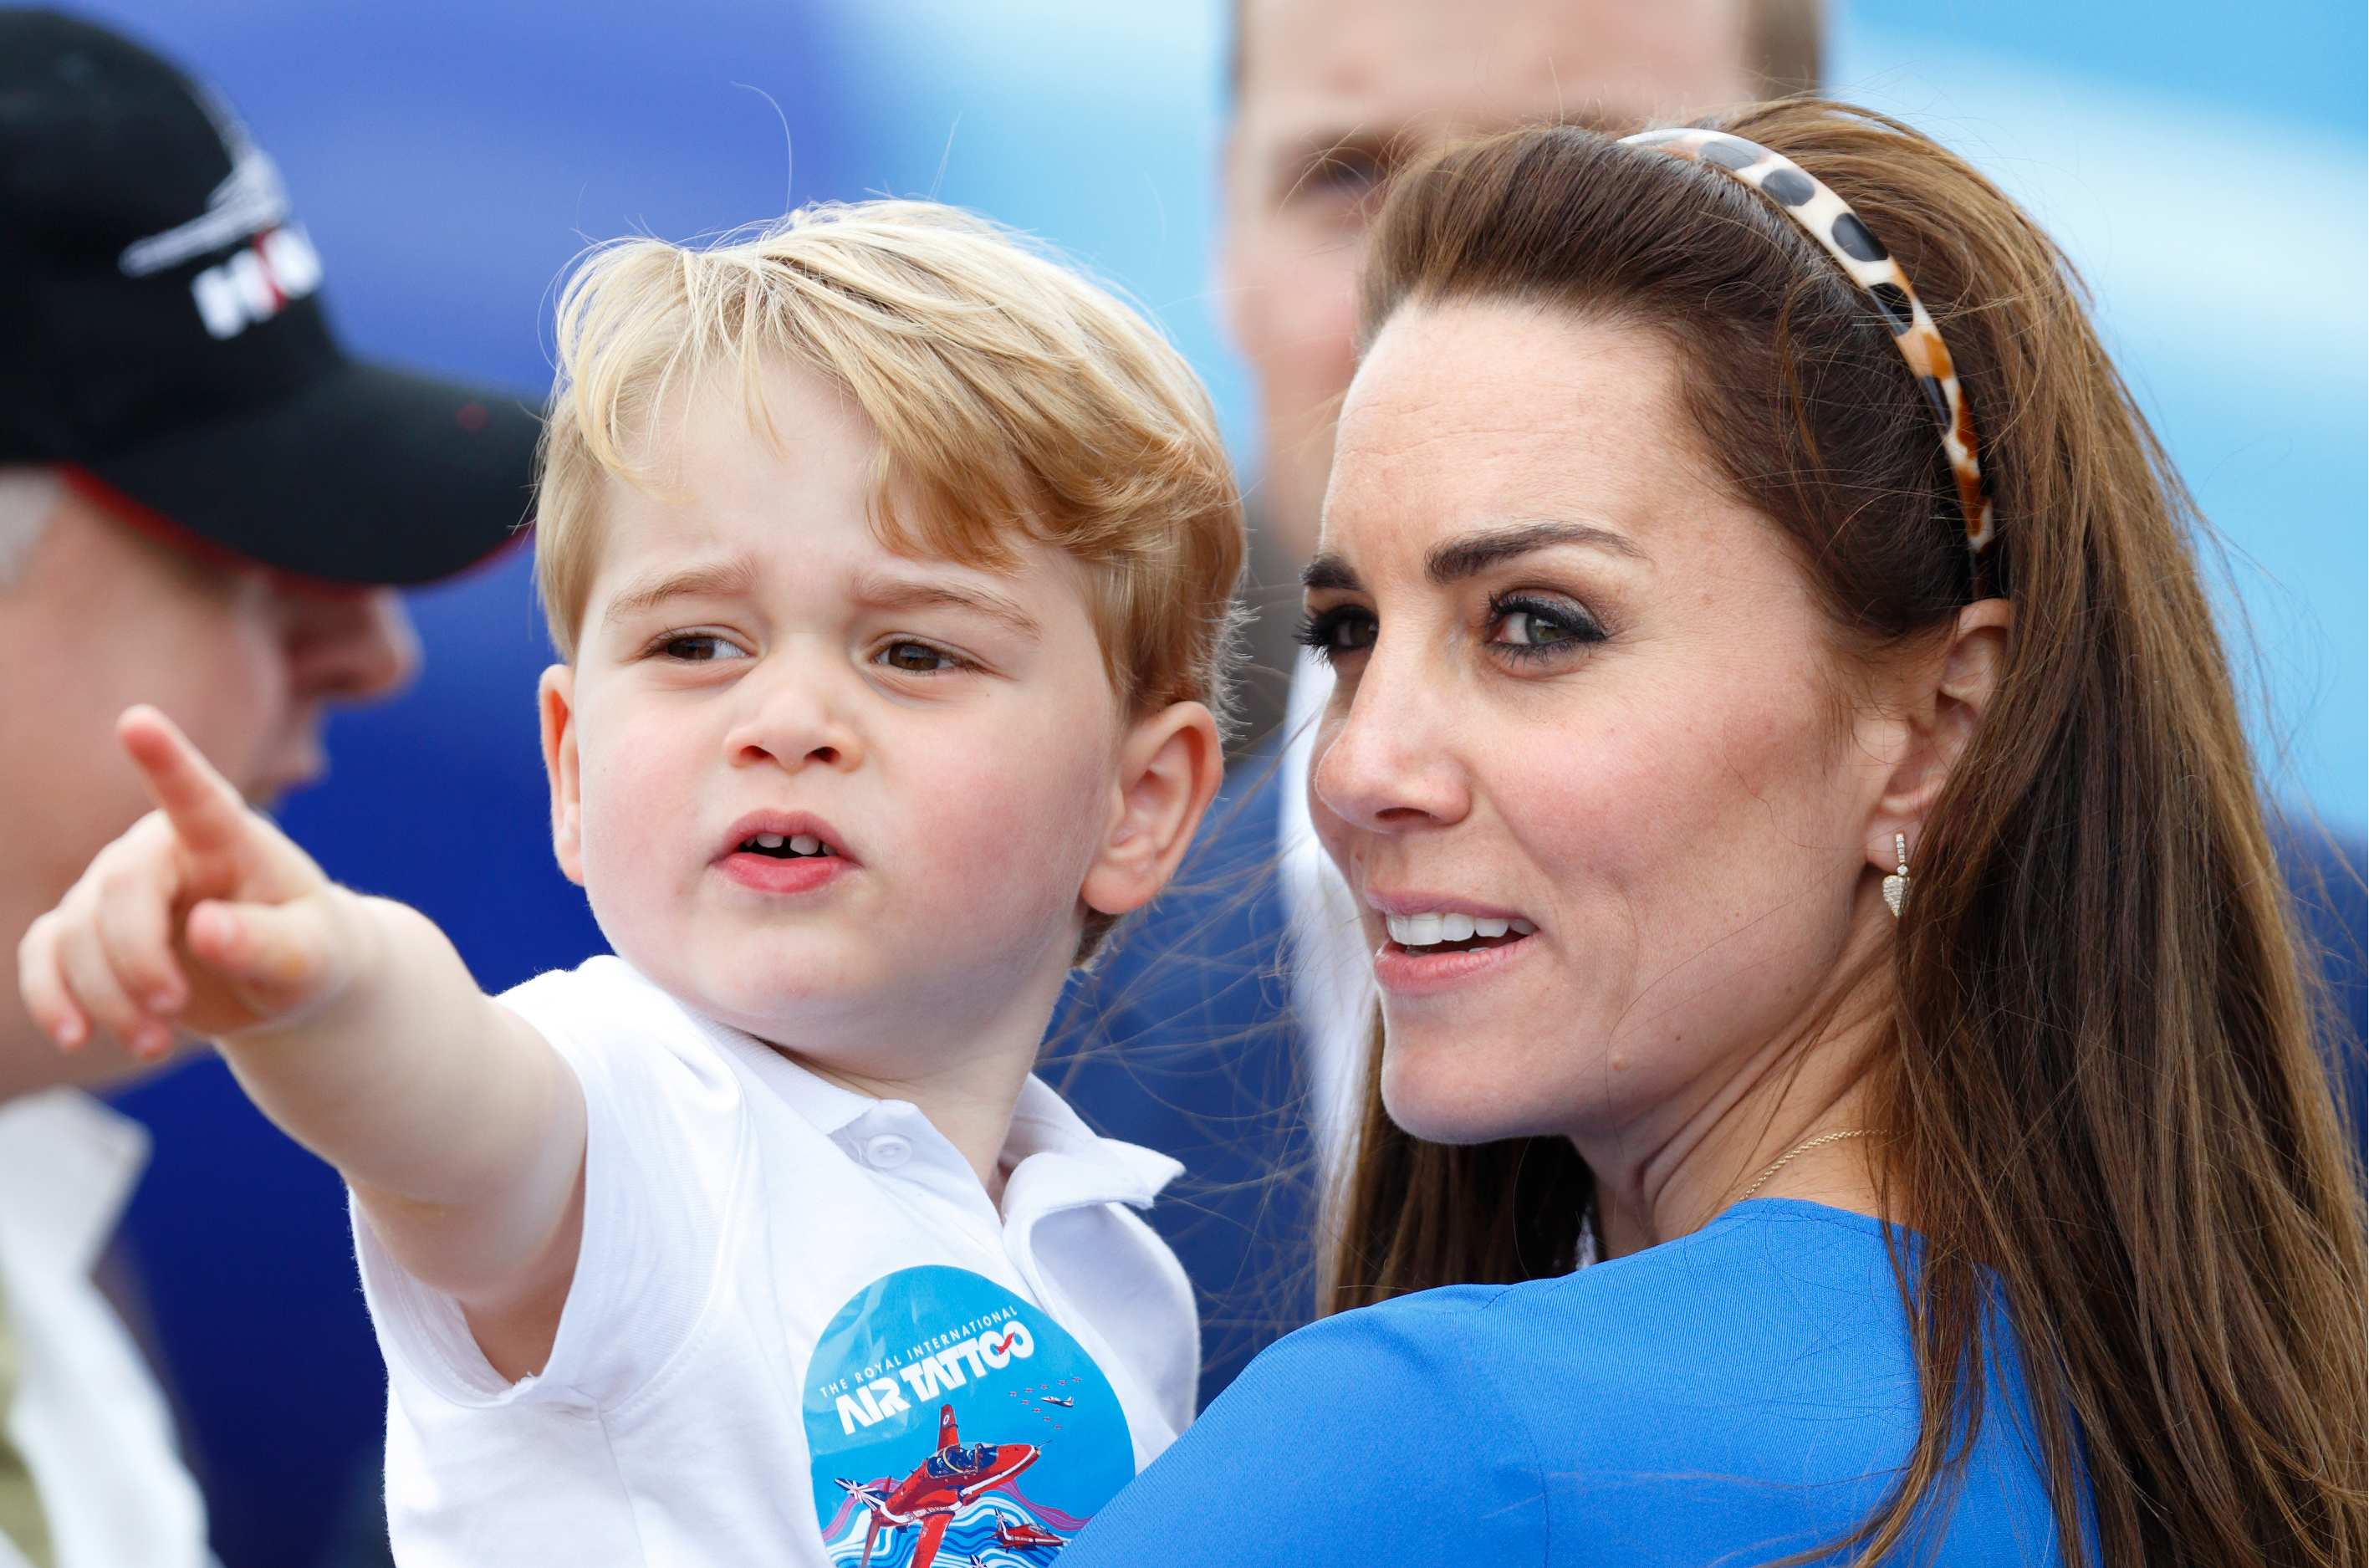 FAIRFORD, UNITED KINGDOM - JULY 08: (EMBARGOED FOR PUBLICATION IN UK NEWSPAPERS UNTIL 48 HOURS AFTER CREATE DATE AND TIME) Prince George of Cambridge and Catherine, Duchess of Cambridge visit the Royal International Air Tattoo at RAF Fairford on July 8, 2016 in Fairford, England. (Photo by Max Mumby/Indigo/Getty Images)